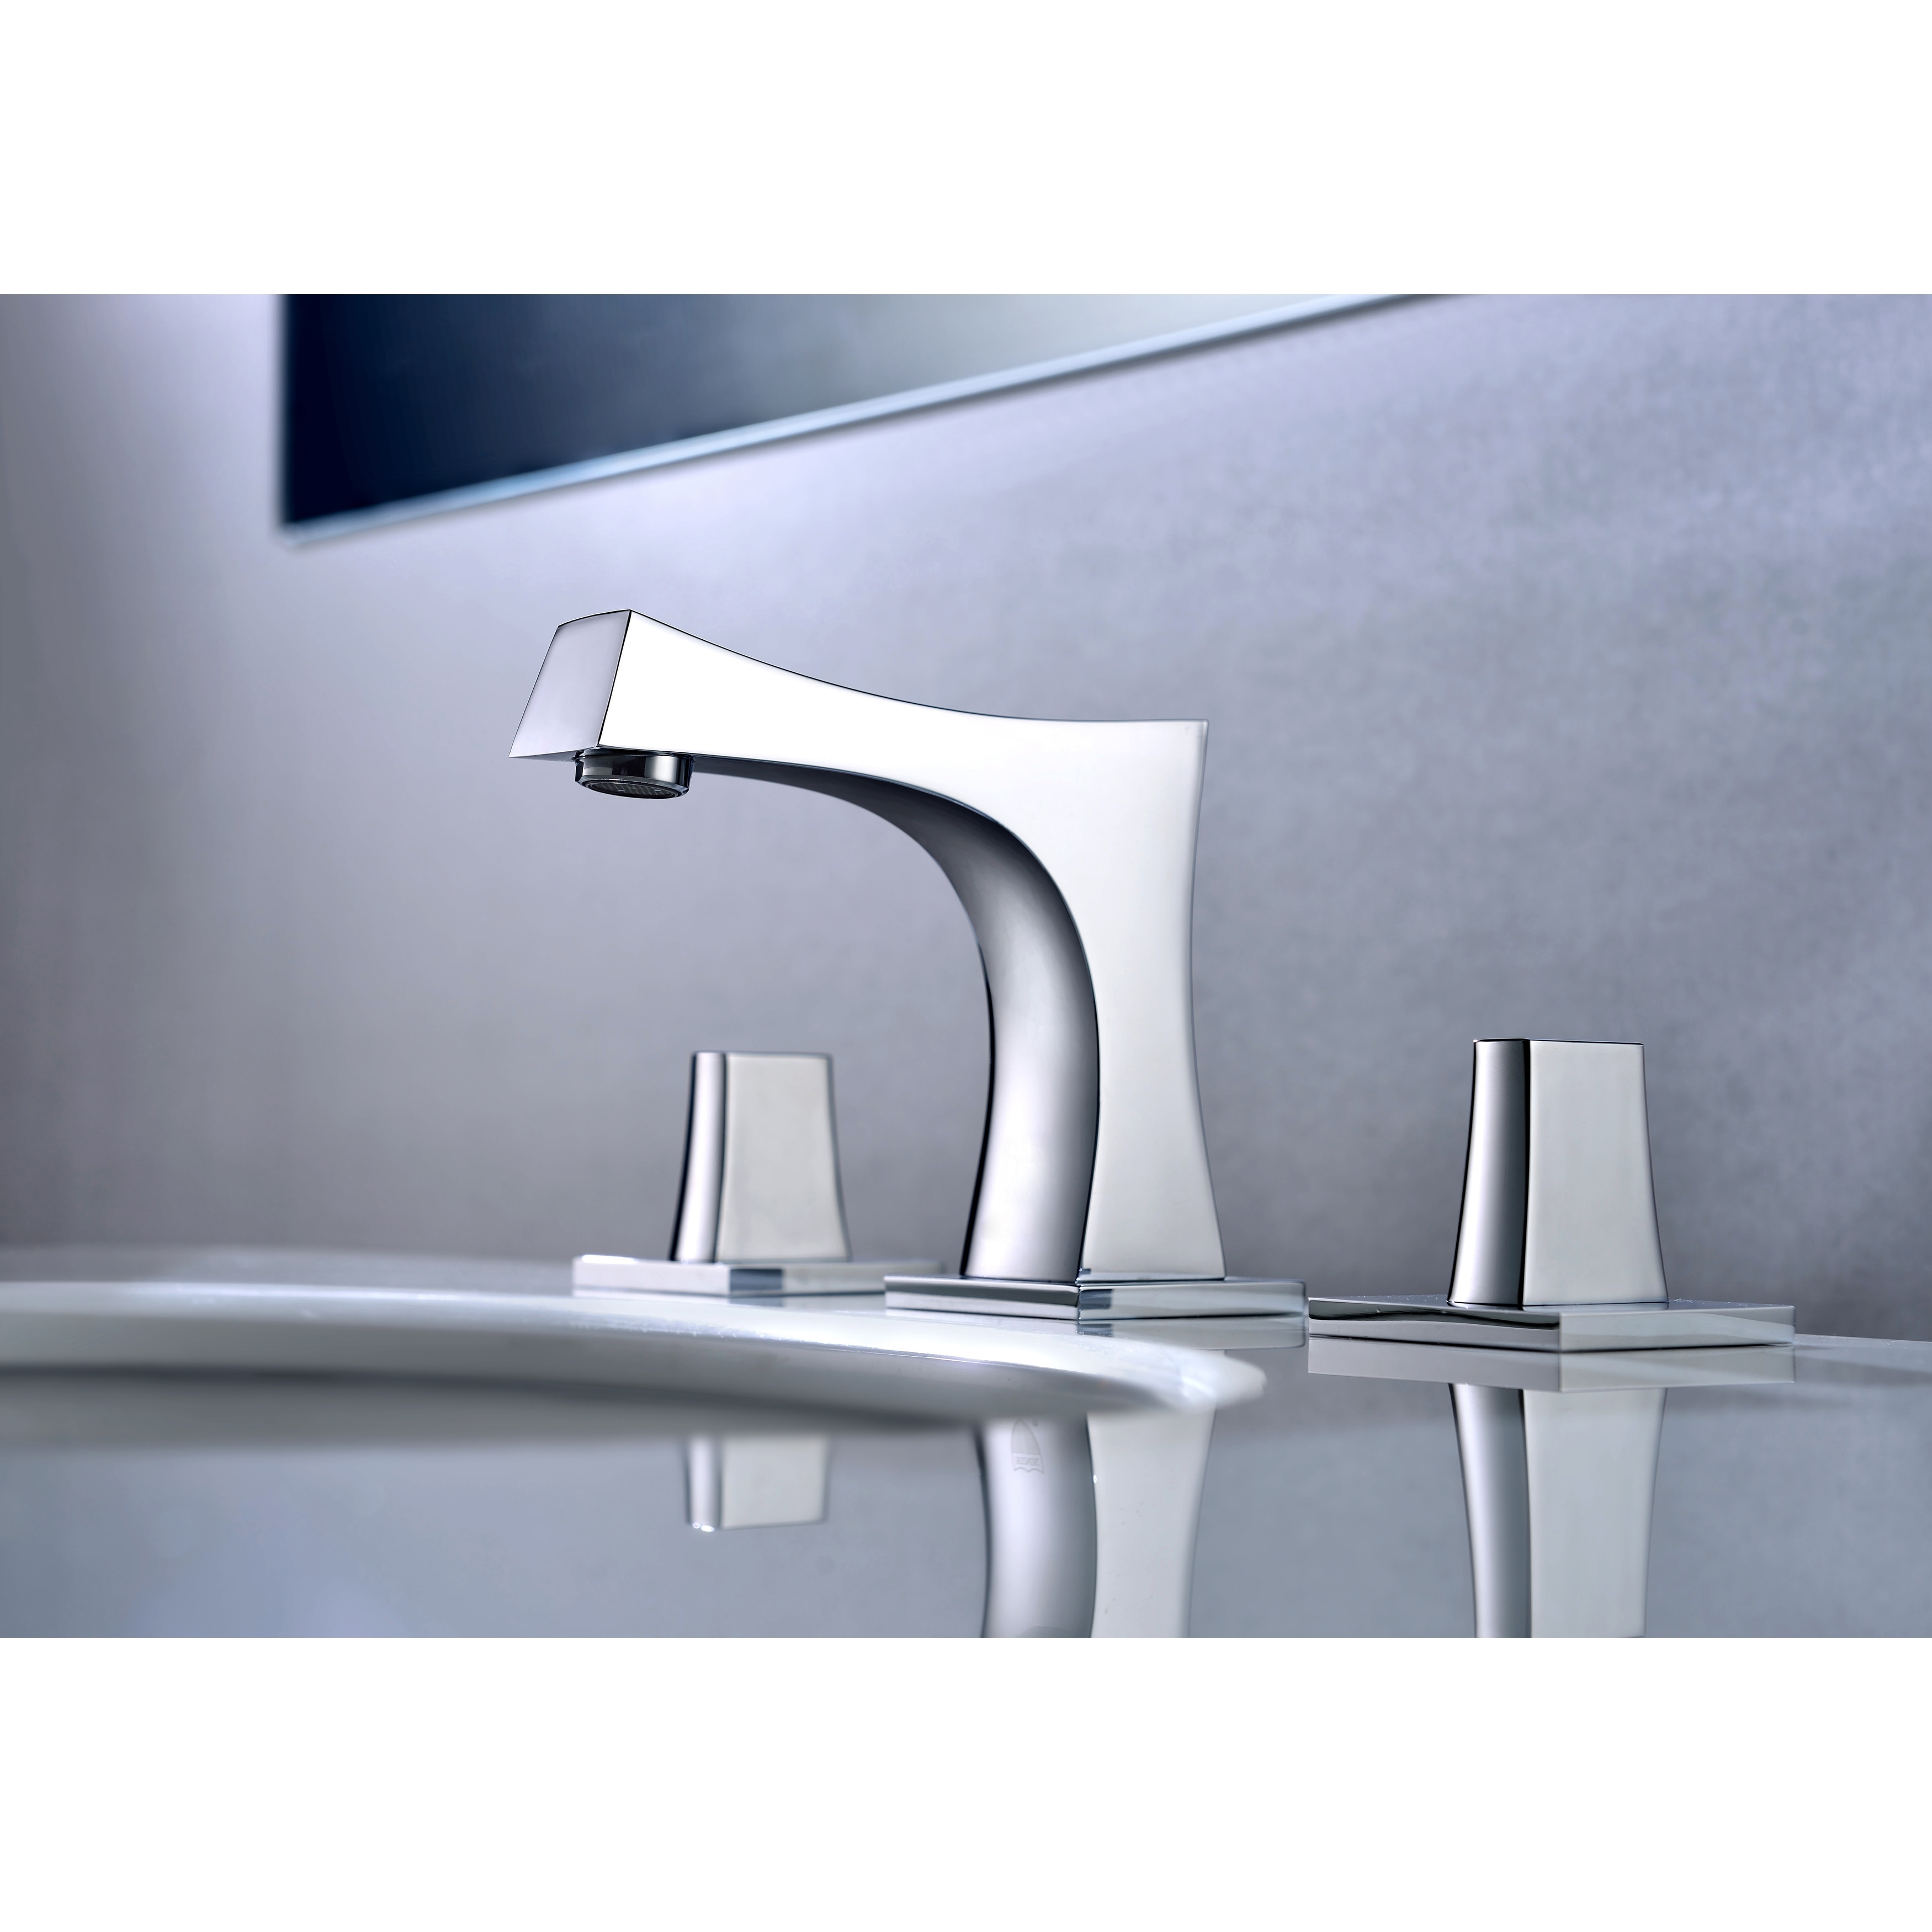 American Imaginations 15.25-in. W Round Undermount Sink Set in White - Chrome Hardware with 3H8-in. CUPC Faucet